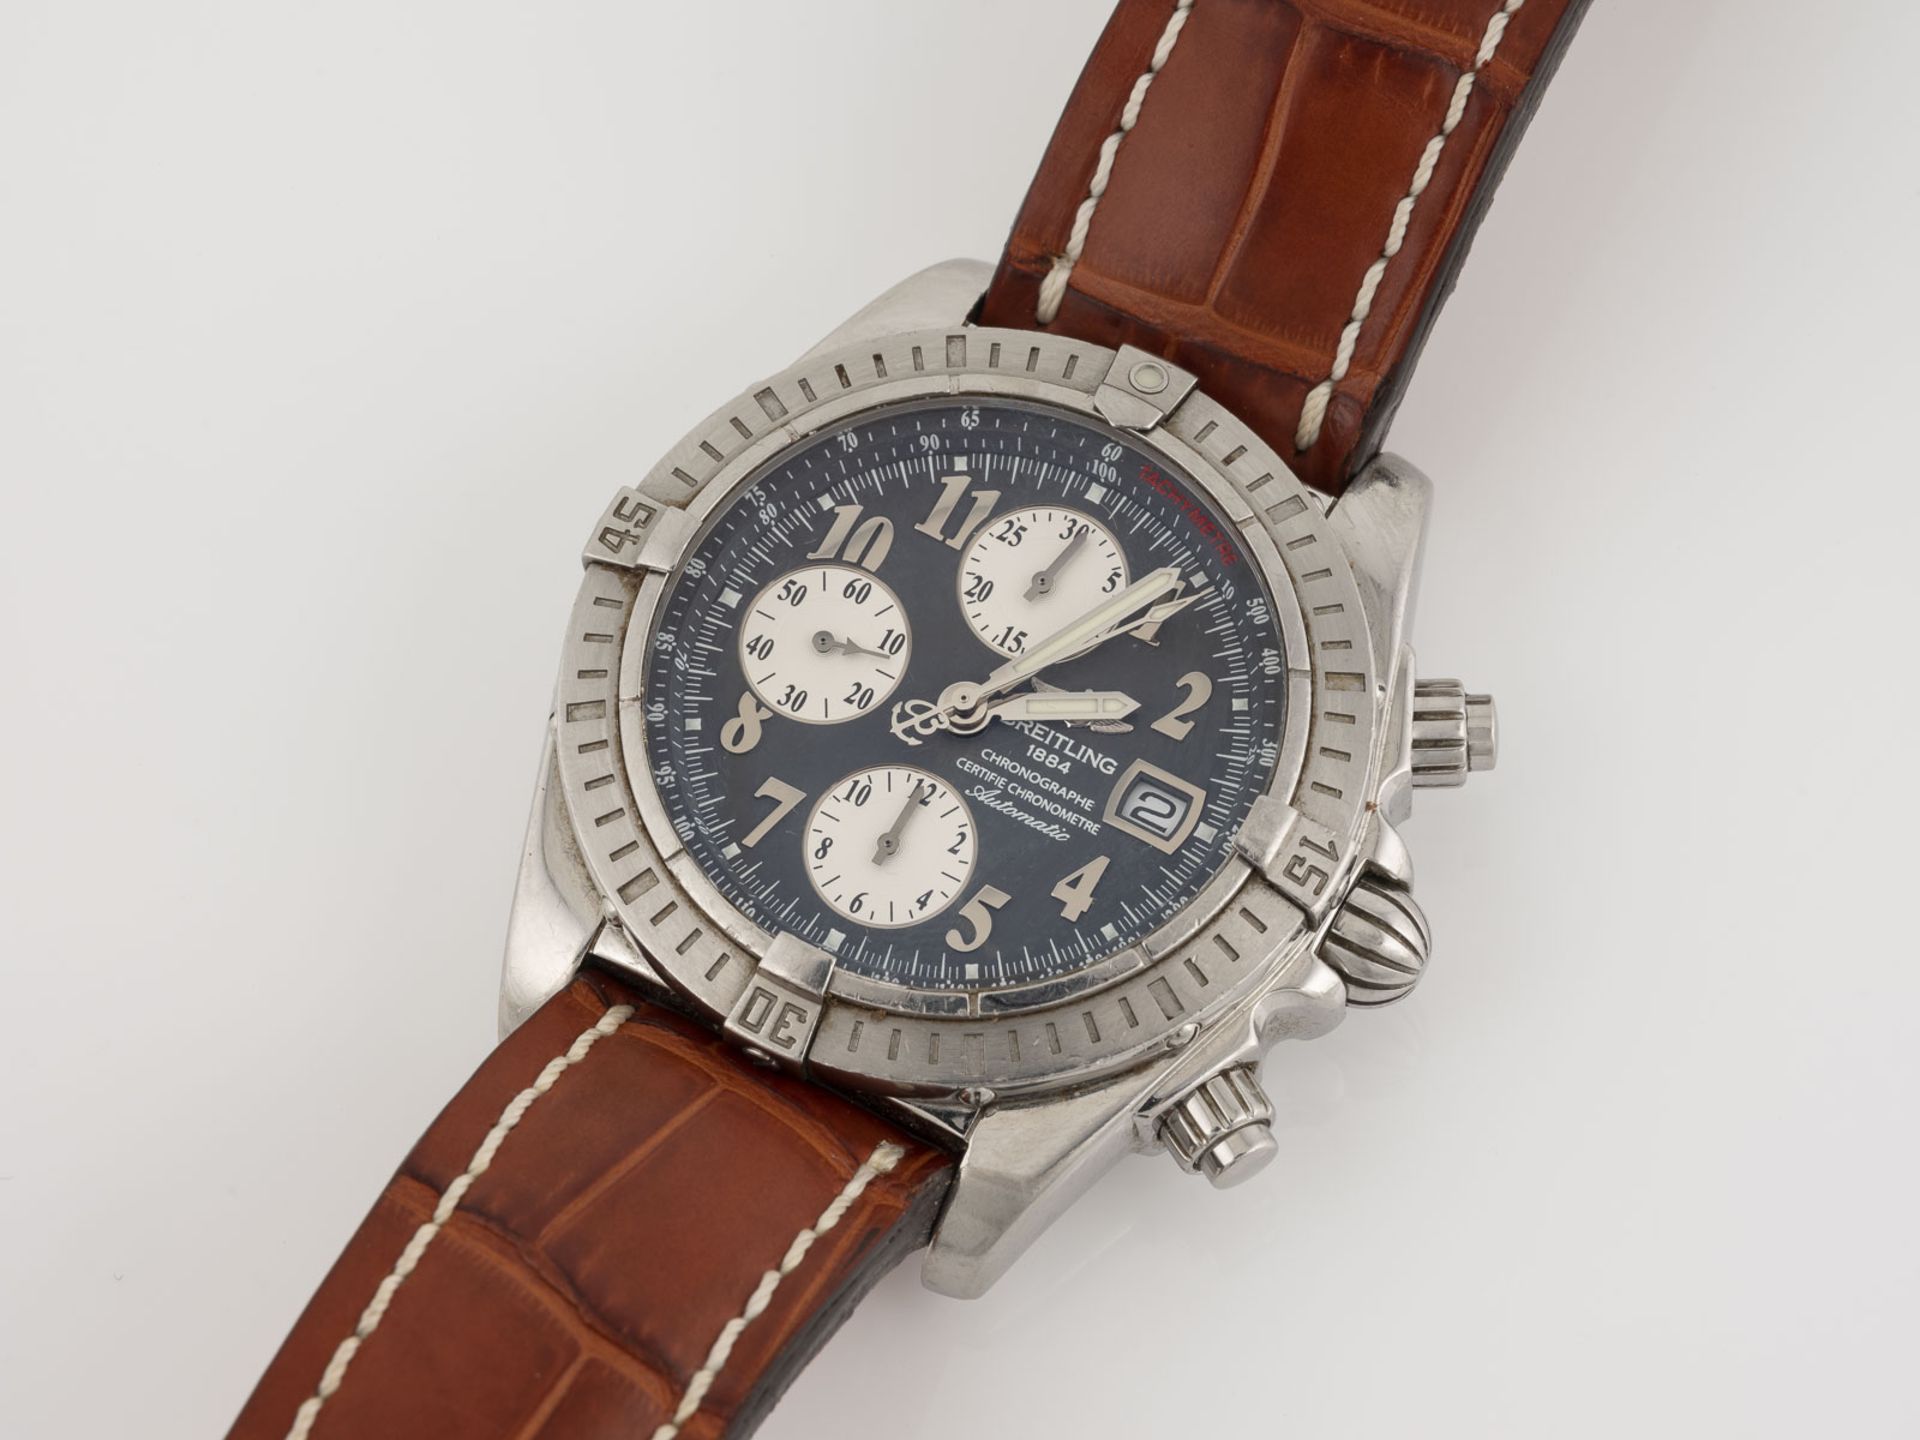 CHRONOGRAPH 'BREITLING - AUTOMATIC' - Image 2 of 4